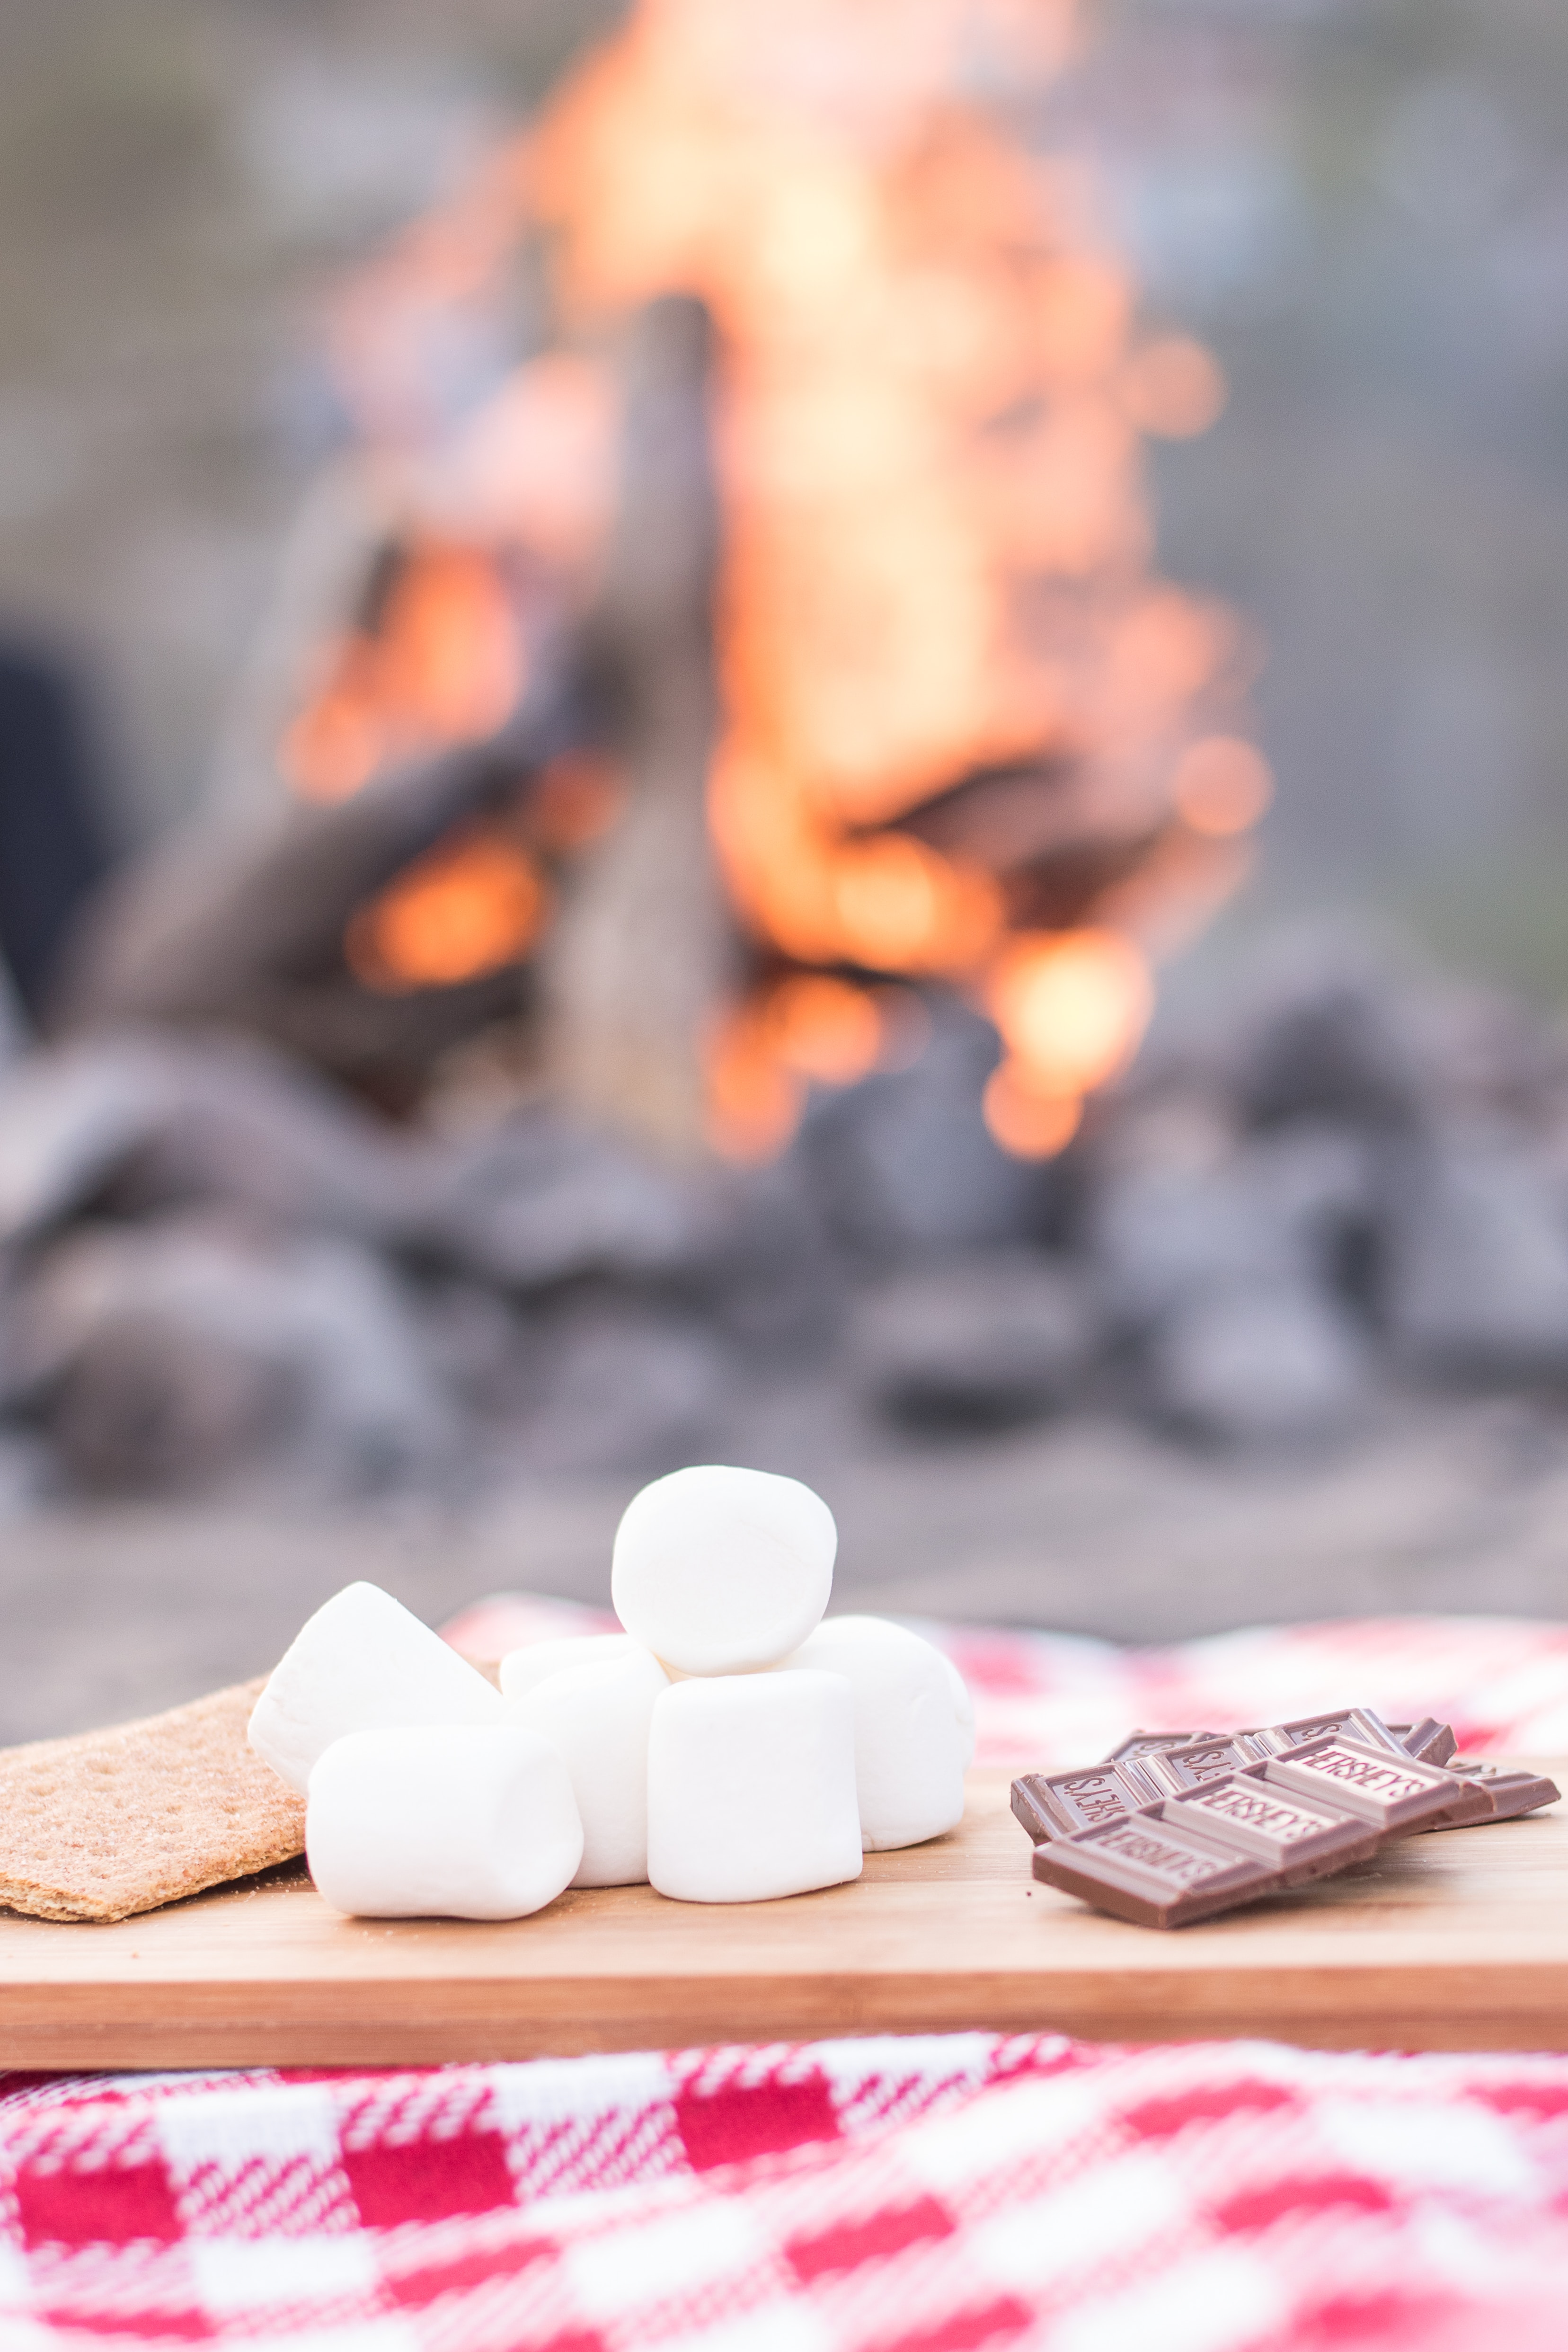 Image shows a photo of the ingredients for smores sitting on a table. In the background, a campfire is burning.